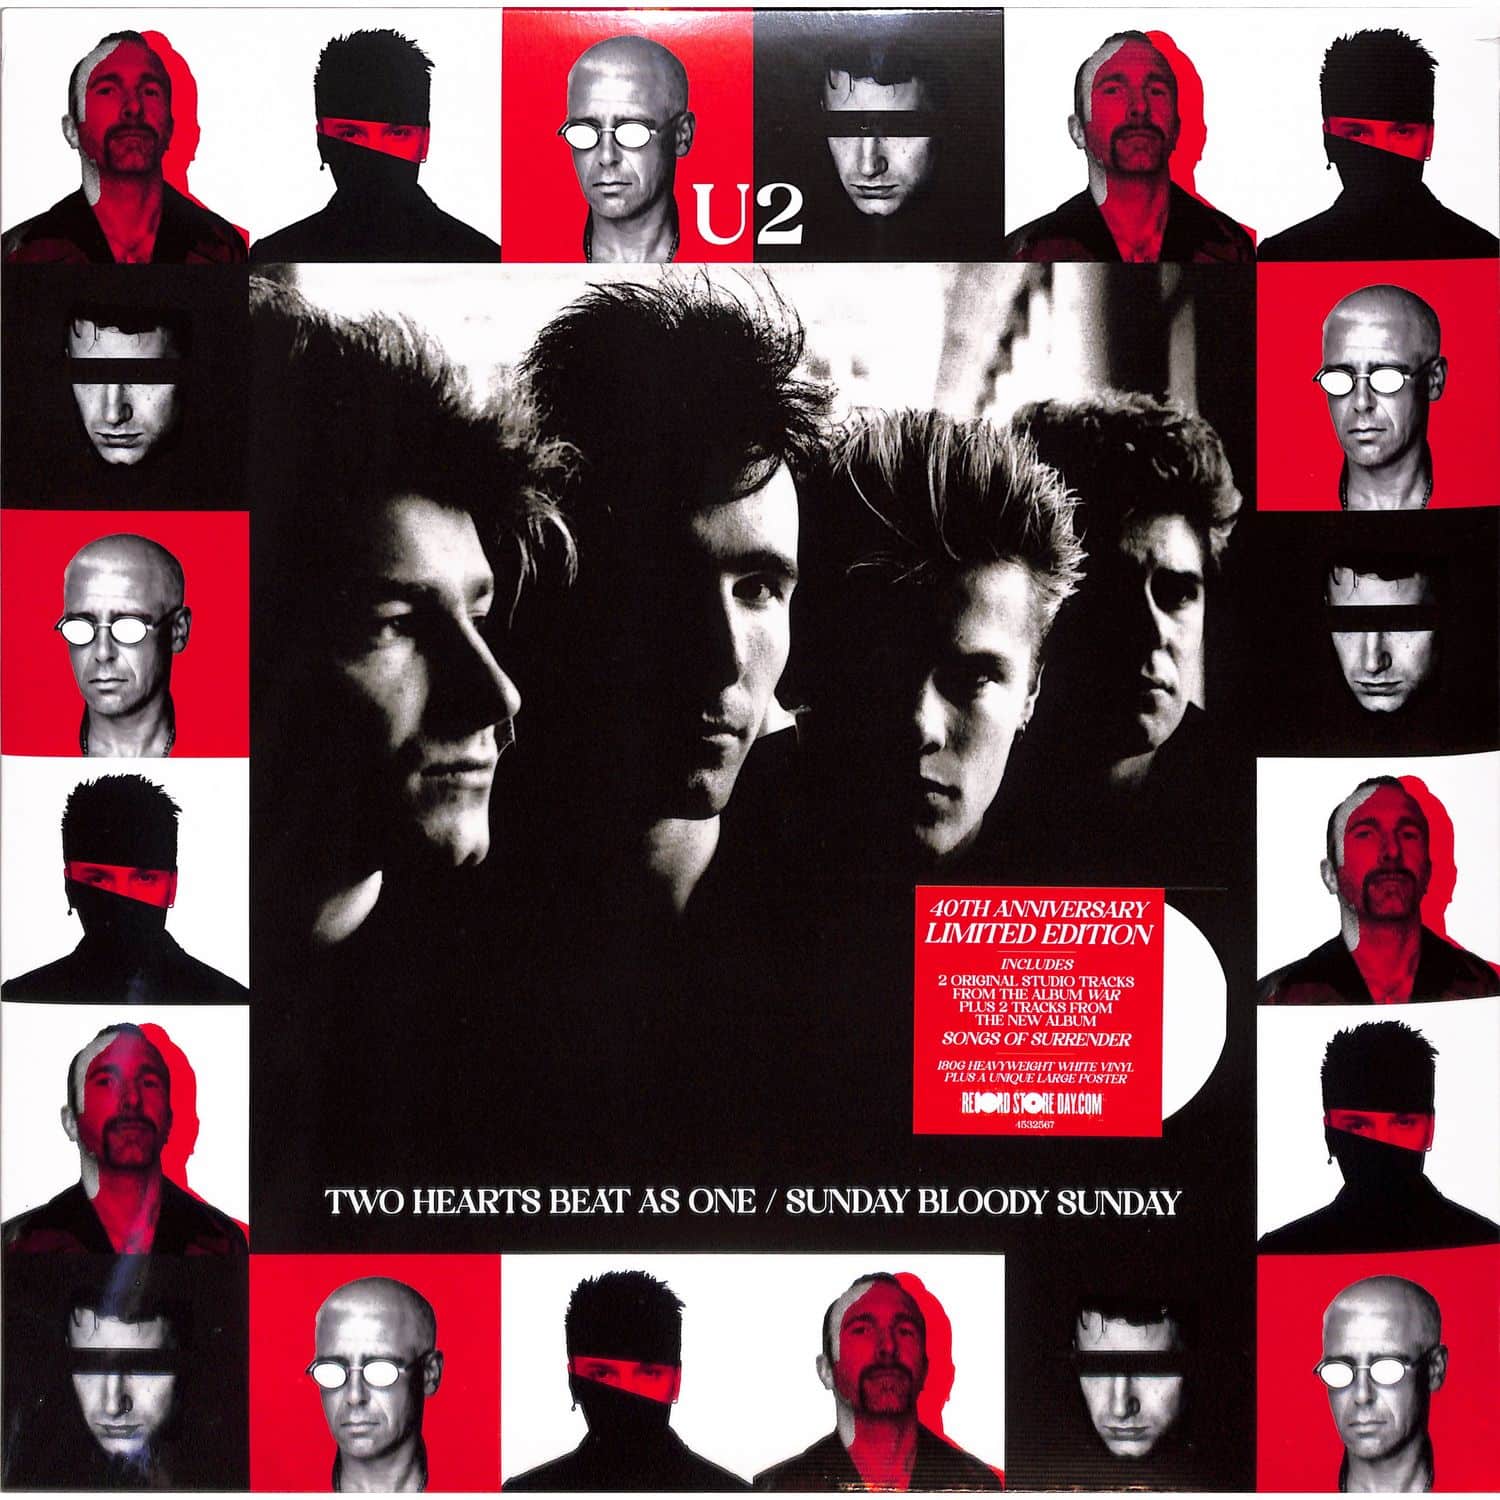 U2 - TWO HEARTS BEAT AS ONE / SUNDAY BLOODY SUNDAY / WAR & SURRENDER MIXES